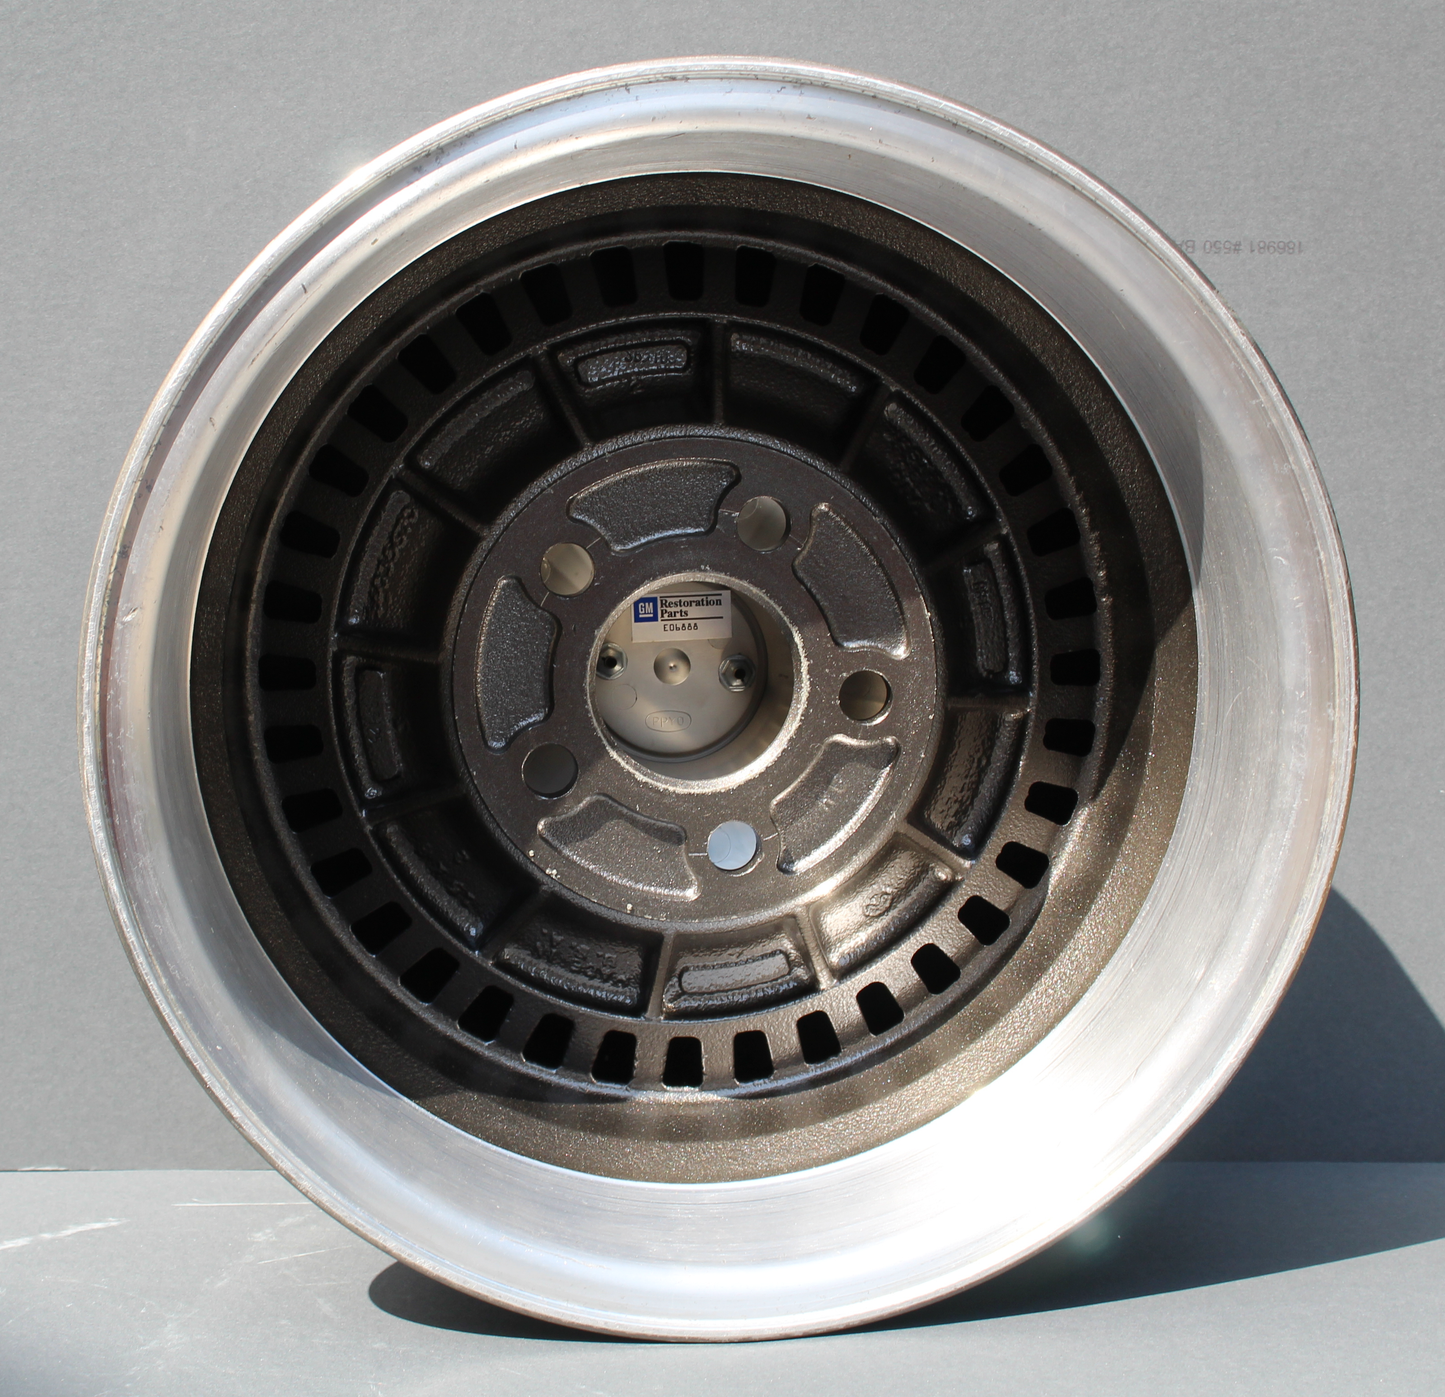 1982 CORVETTE COLLECTOR EDITION  WHEEL REFINISHED WITH NEW CENTER CAP AND CAP INSERT.